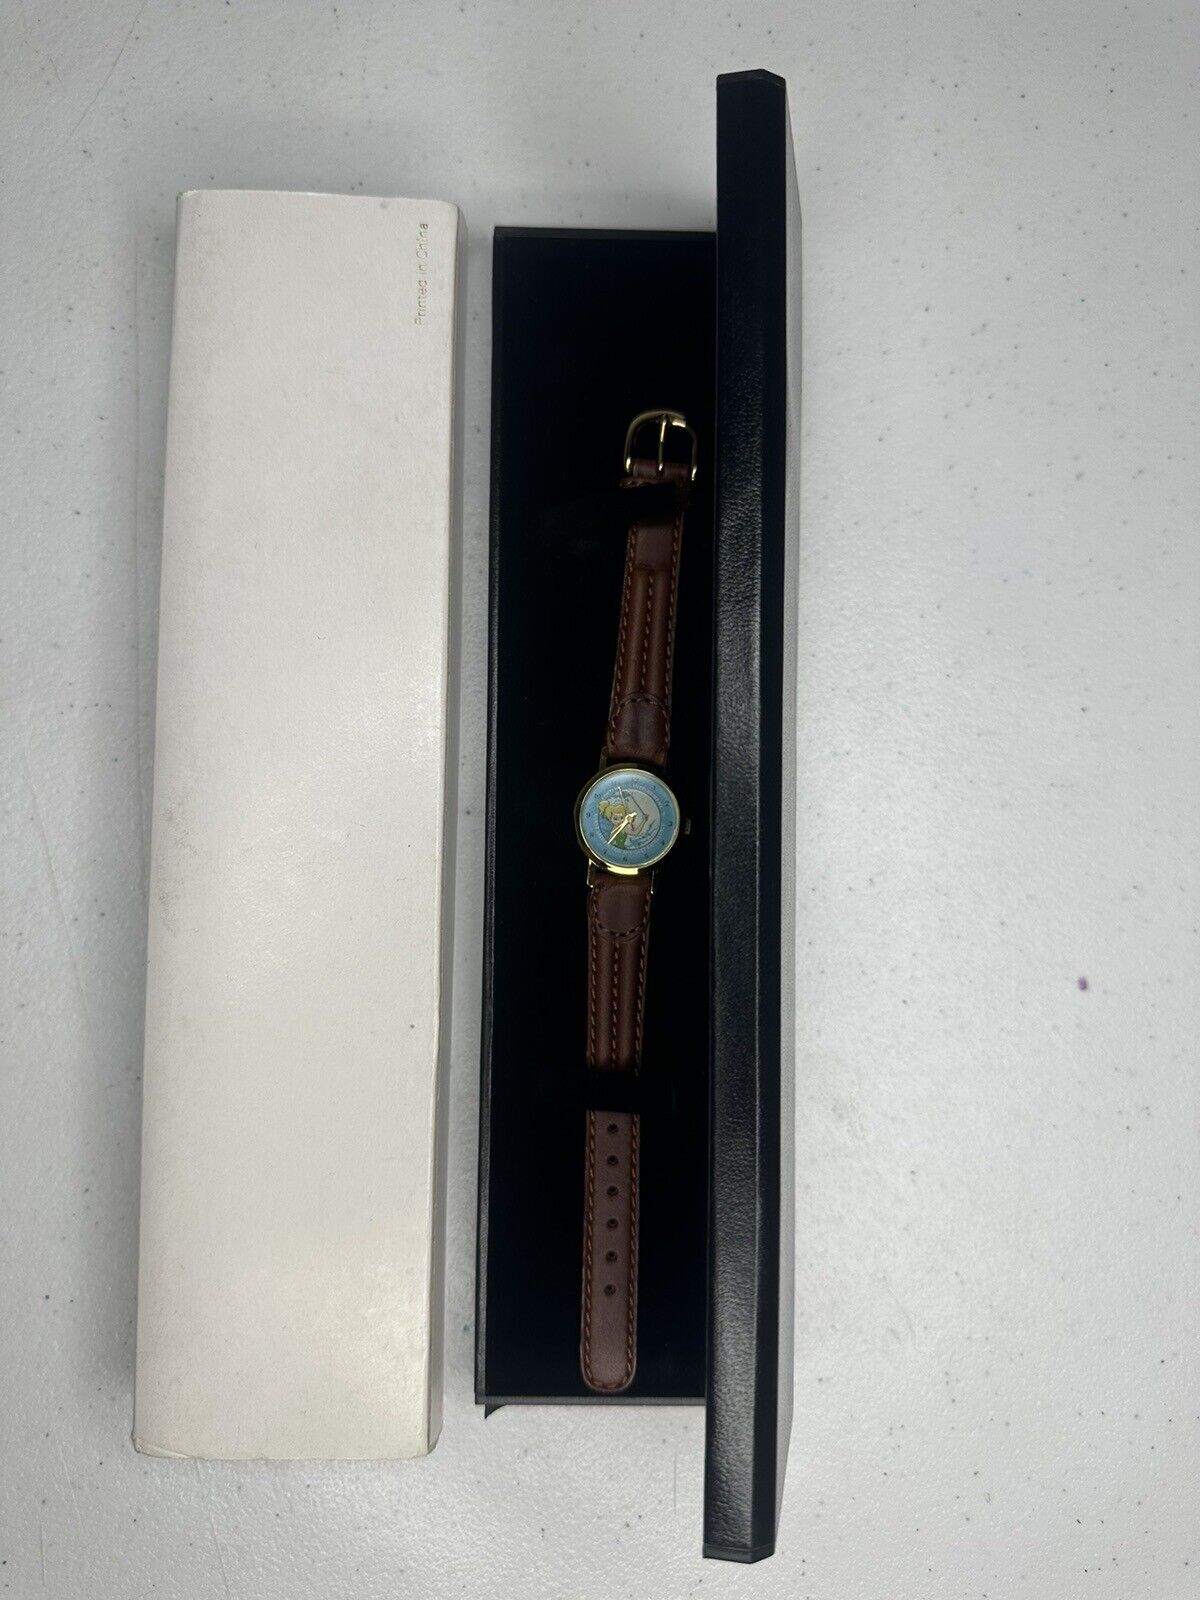 Disney Vintage-Inspired Tinkerbell Graphic Watch with Leather Strap - Collector's Timepiece - TreasuTiques